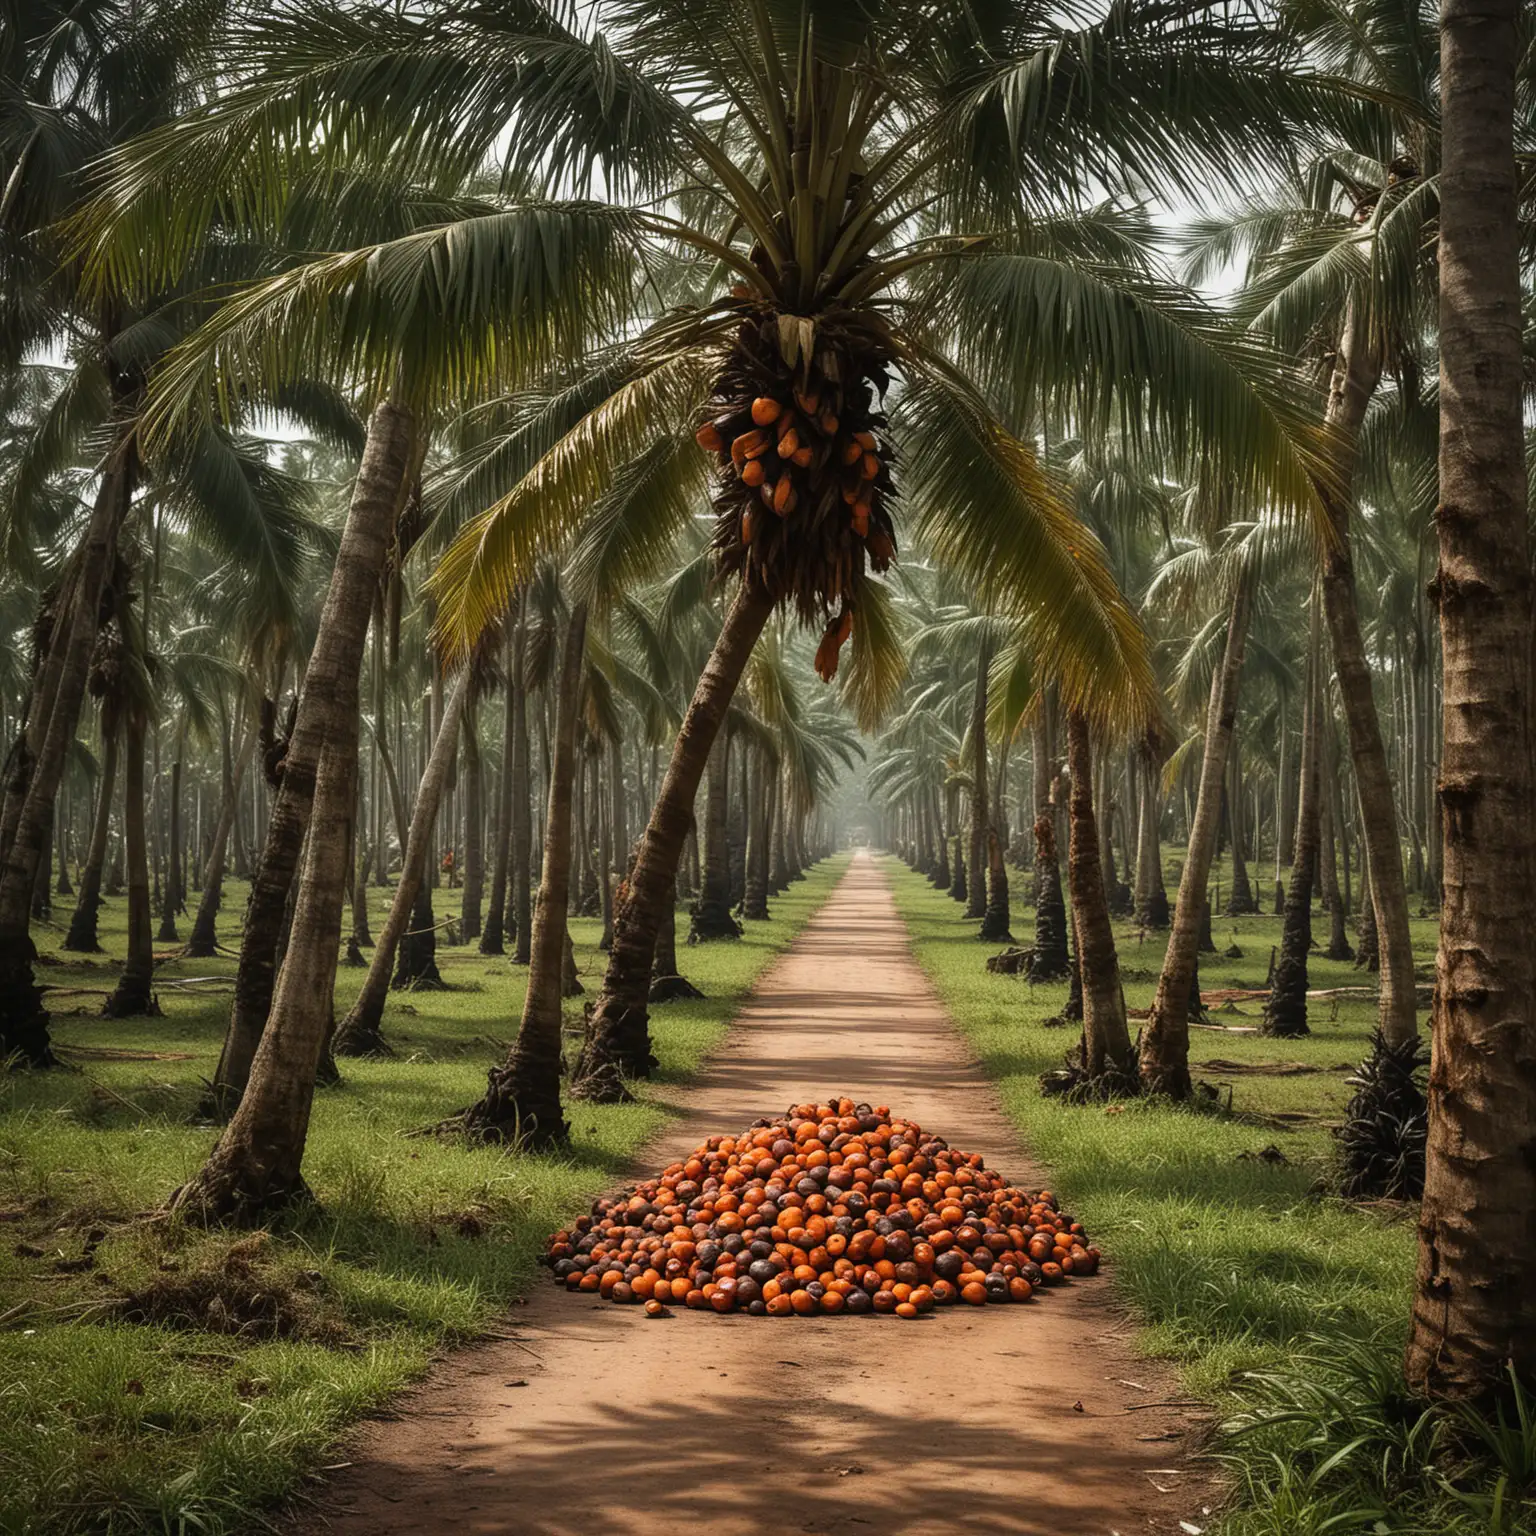 Create a series that focuses on palm oil extracted from fresh palm fruit. The location should be a comfortable and accessible environment.